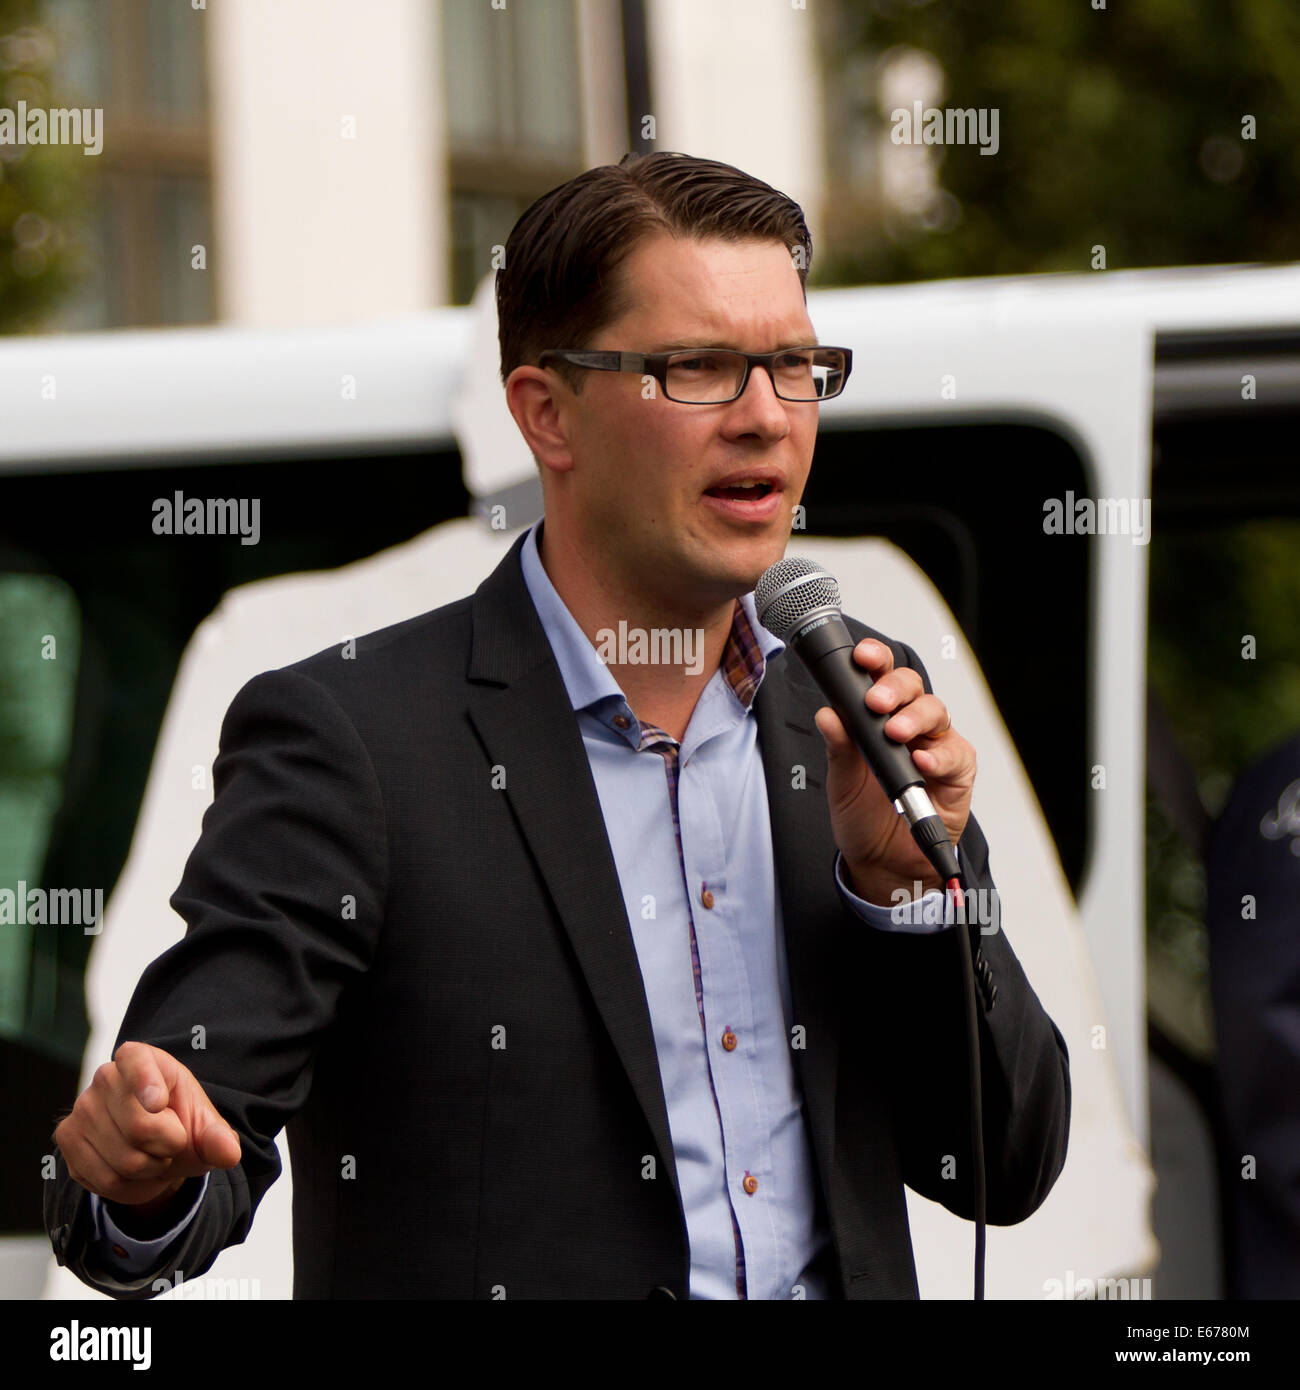 Jimmie Åkesson, leader of the Swedish party Sverigedemokraterna, holding an election speech Stock Photo